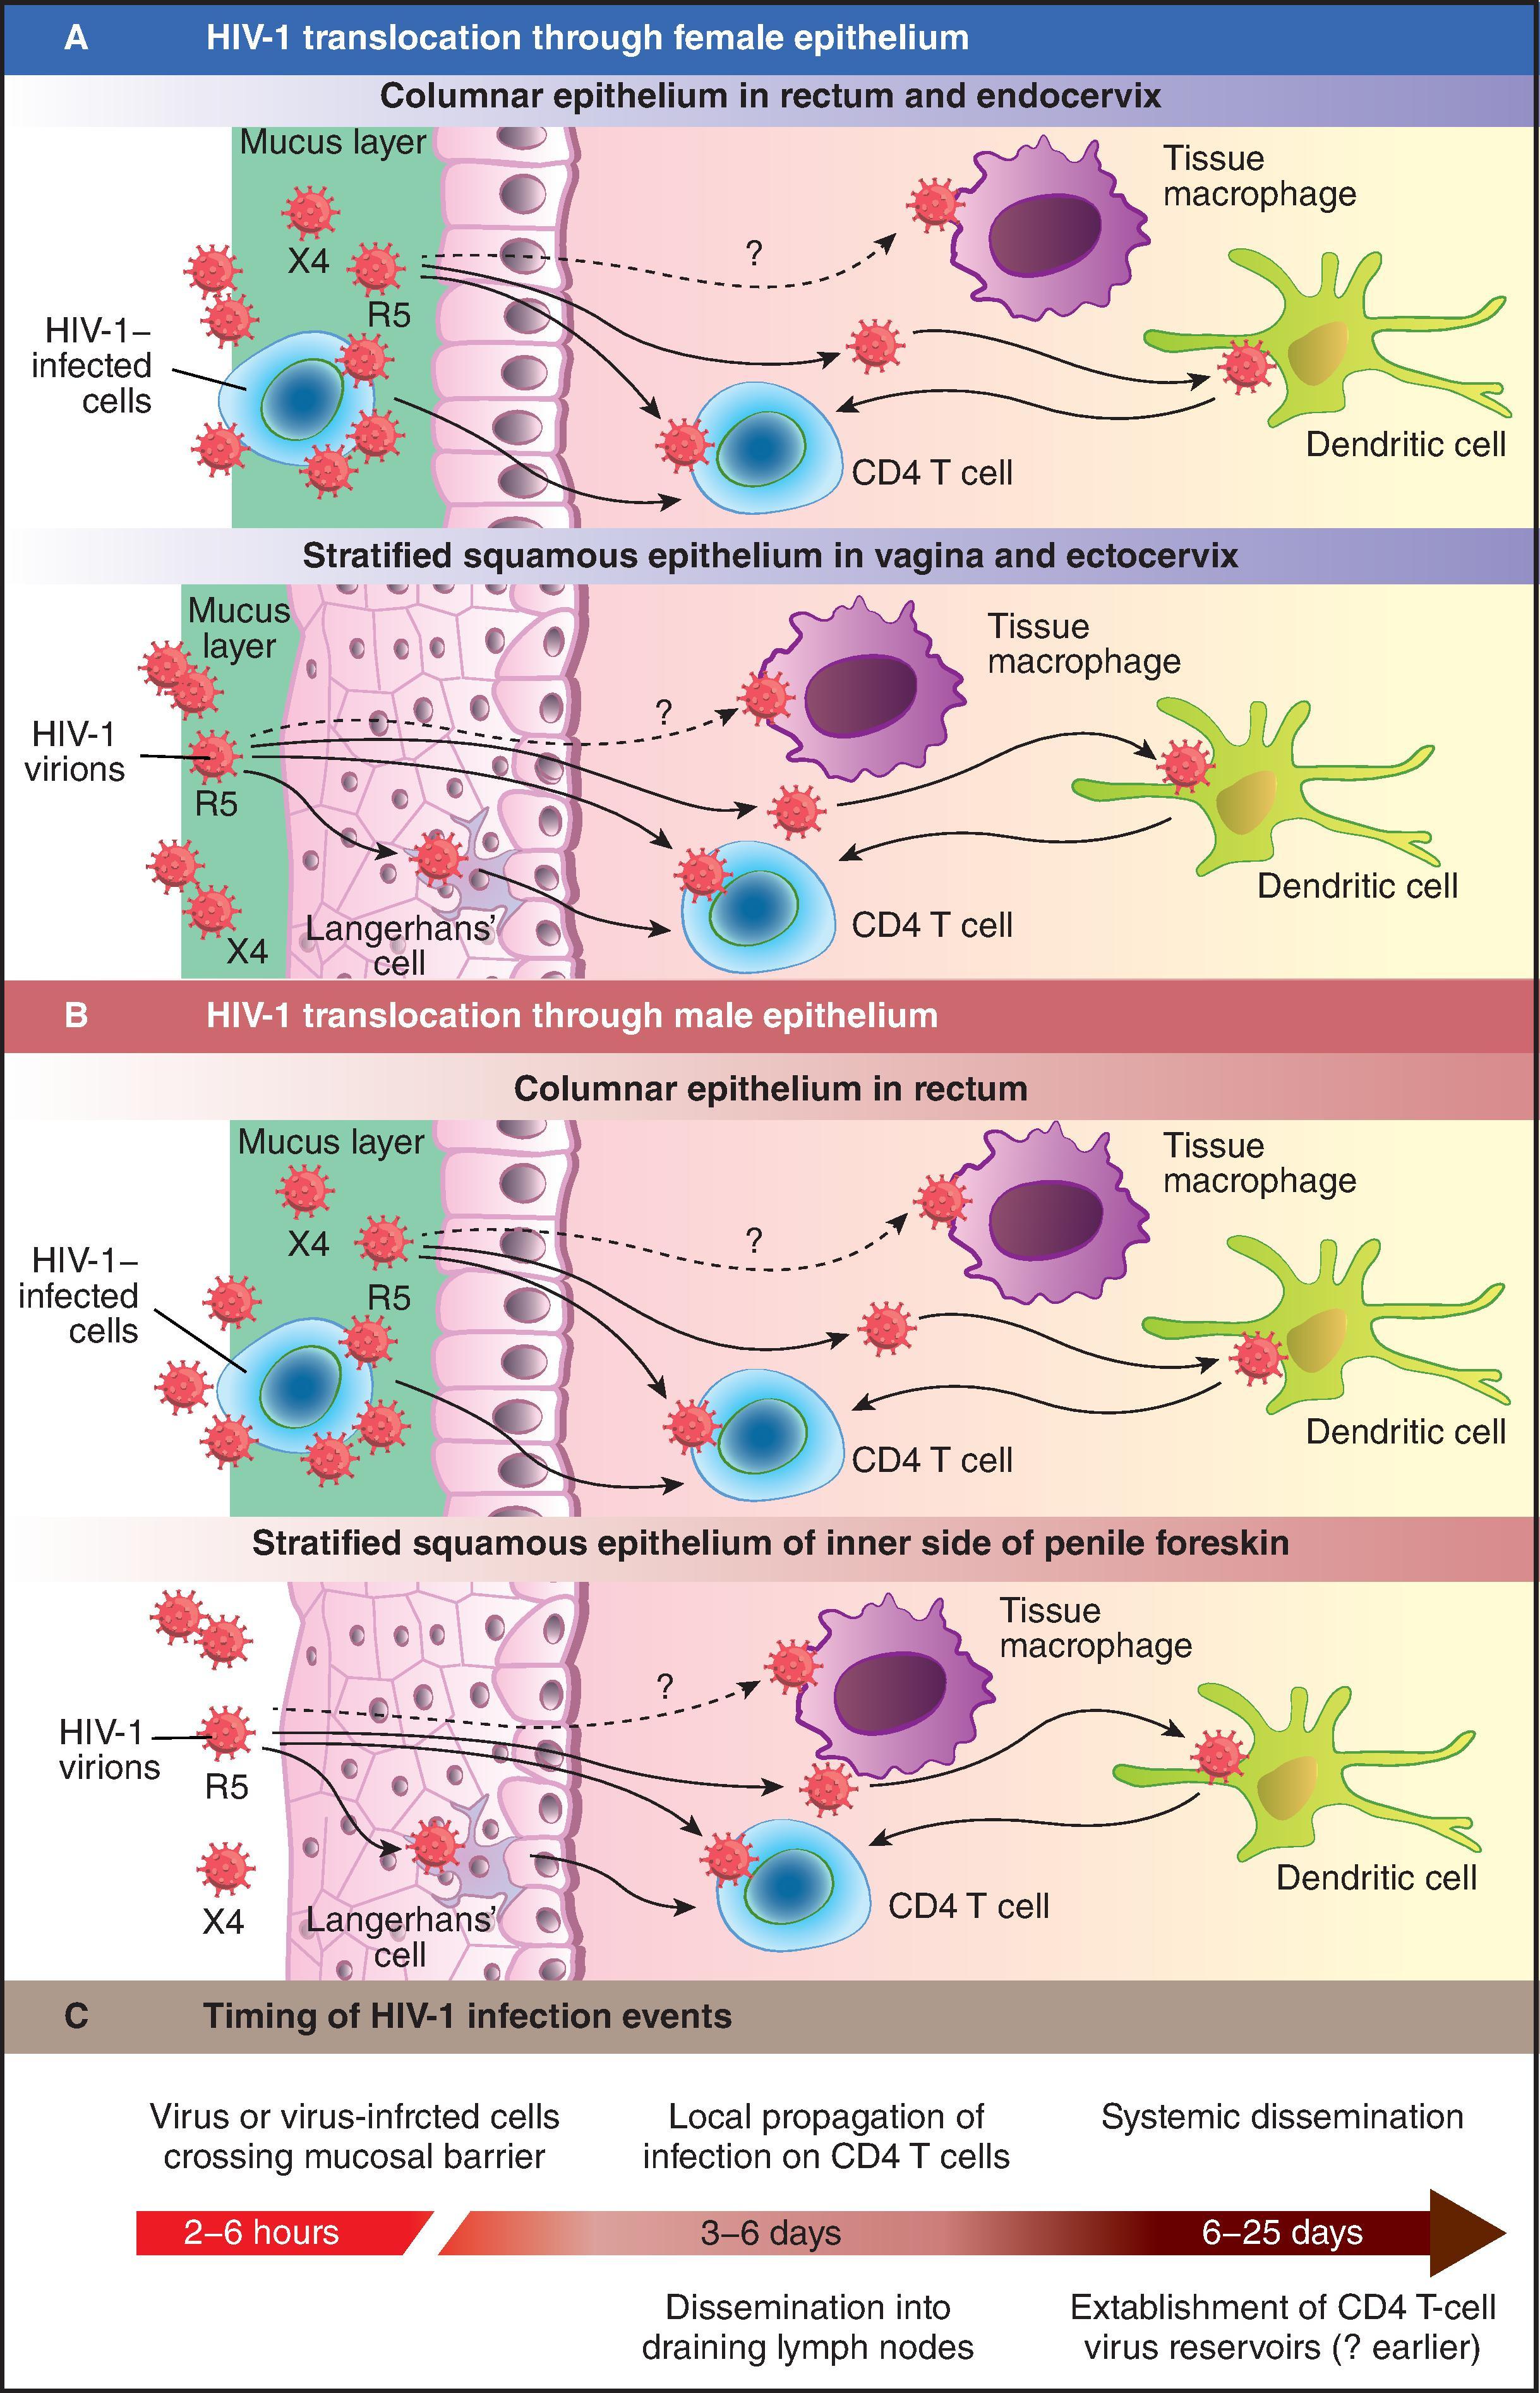 Fig. 31.5, Progression from HIV-1 transmission to productive clinical infection. HIV-1 must traverse several tissue layers in the female vagina or rectal mucosa to come into contact with appropriate receptive cells (Panel A) . The CCR5 (R5) viral strain has selective transmission advantages that remain poorly explained, and R5 variants make up the majority of transmitted and founder viruses. CXCR4 (X4) variants are transmitted only rarely (Panel B) . Virus–cell interactions in the male submucosa are likely to be similar to those in female submucosa, with viral targets including Langerhans’ cells, other submucosal dendritic cells, and CD4 cells (Panel C) . Dissemination into draining lymph nodes and the systemic circulation rapidly follows, with establishment of the CD4 T-cell viral reservoirs. (From Cohen MS, Shaw GM, McMichael AJ, Haynes BF. Acute HIV-1 infection. N Engl J Med. 2011;364:1943–1954.)